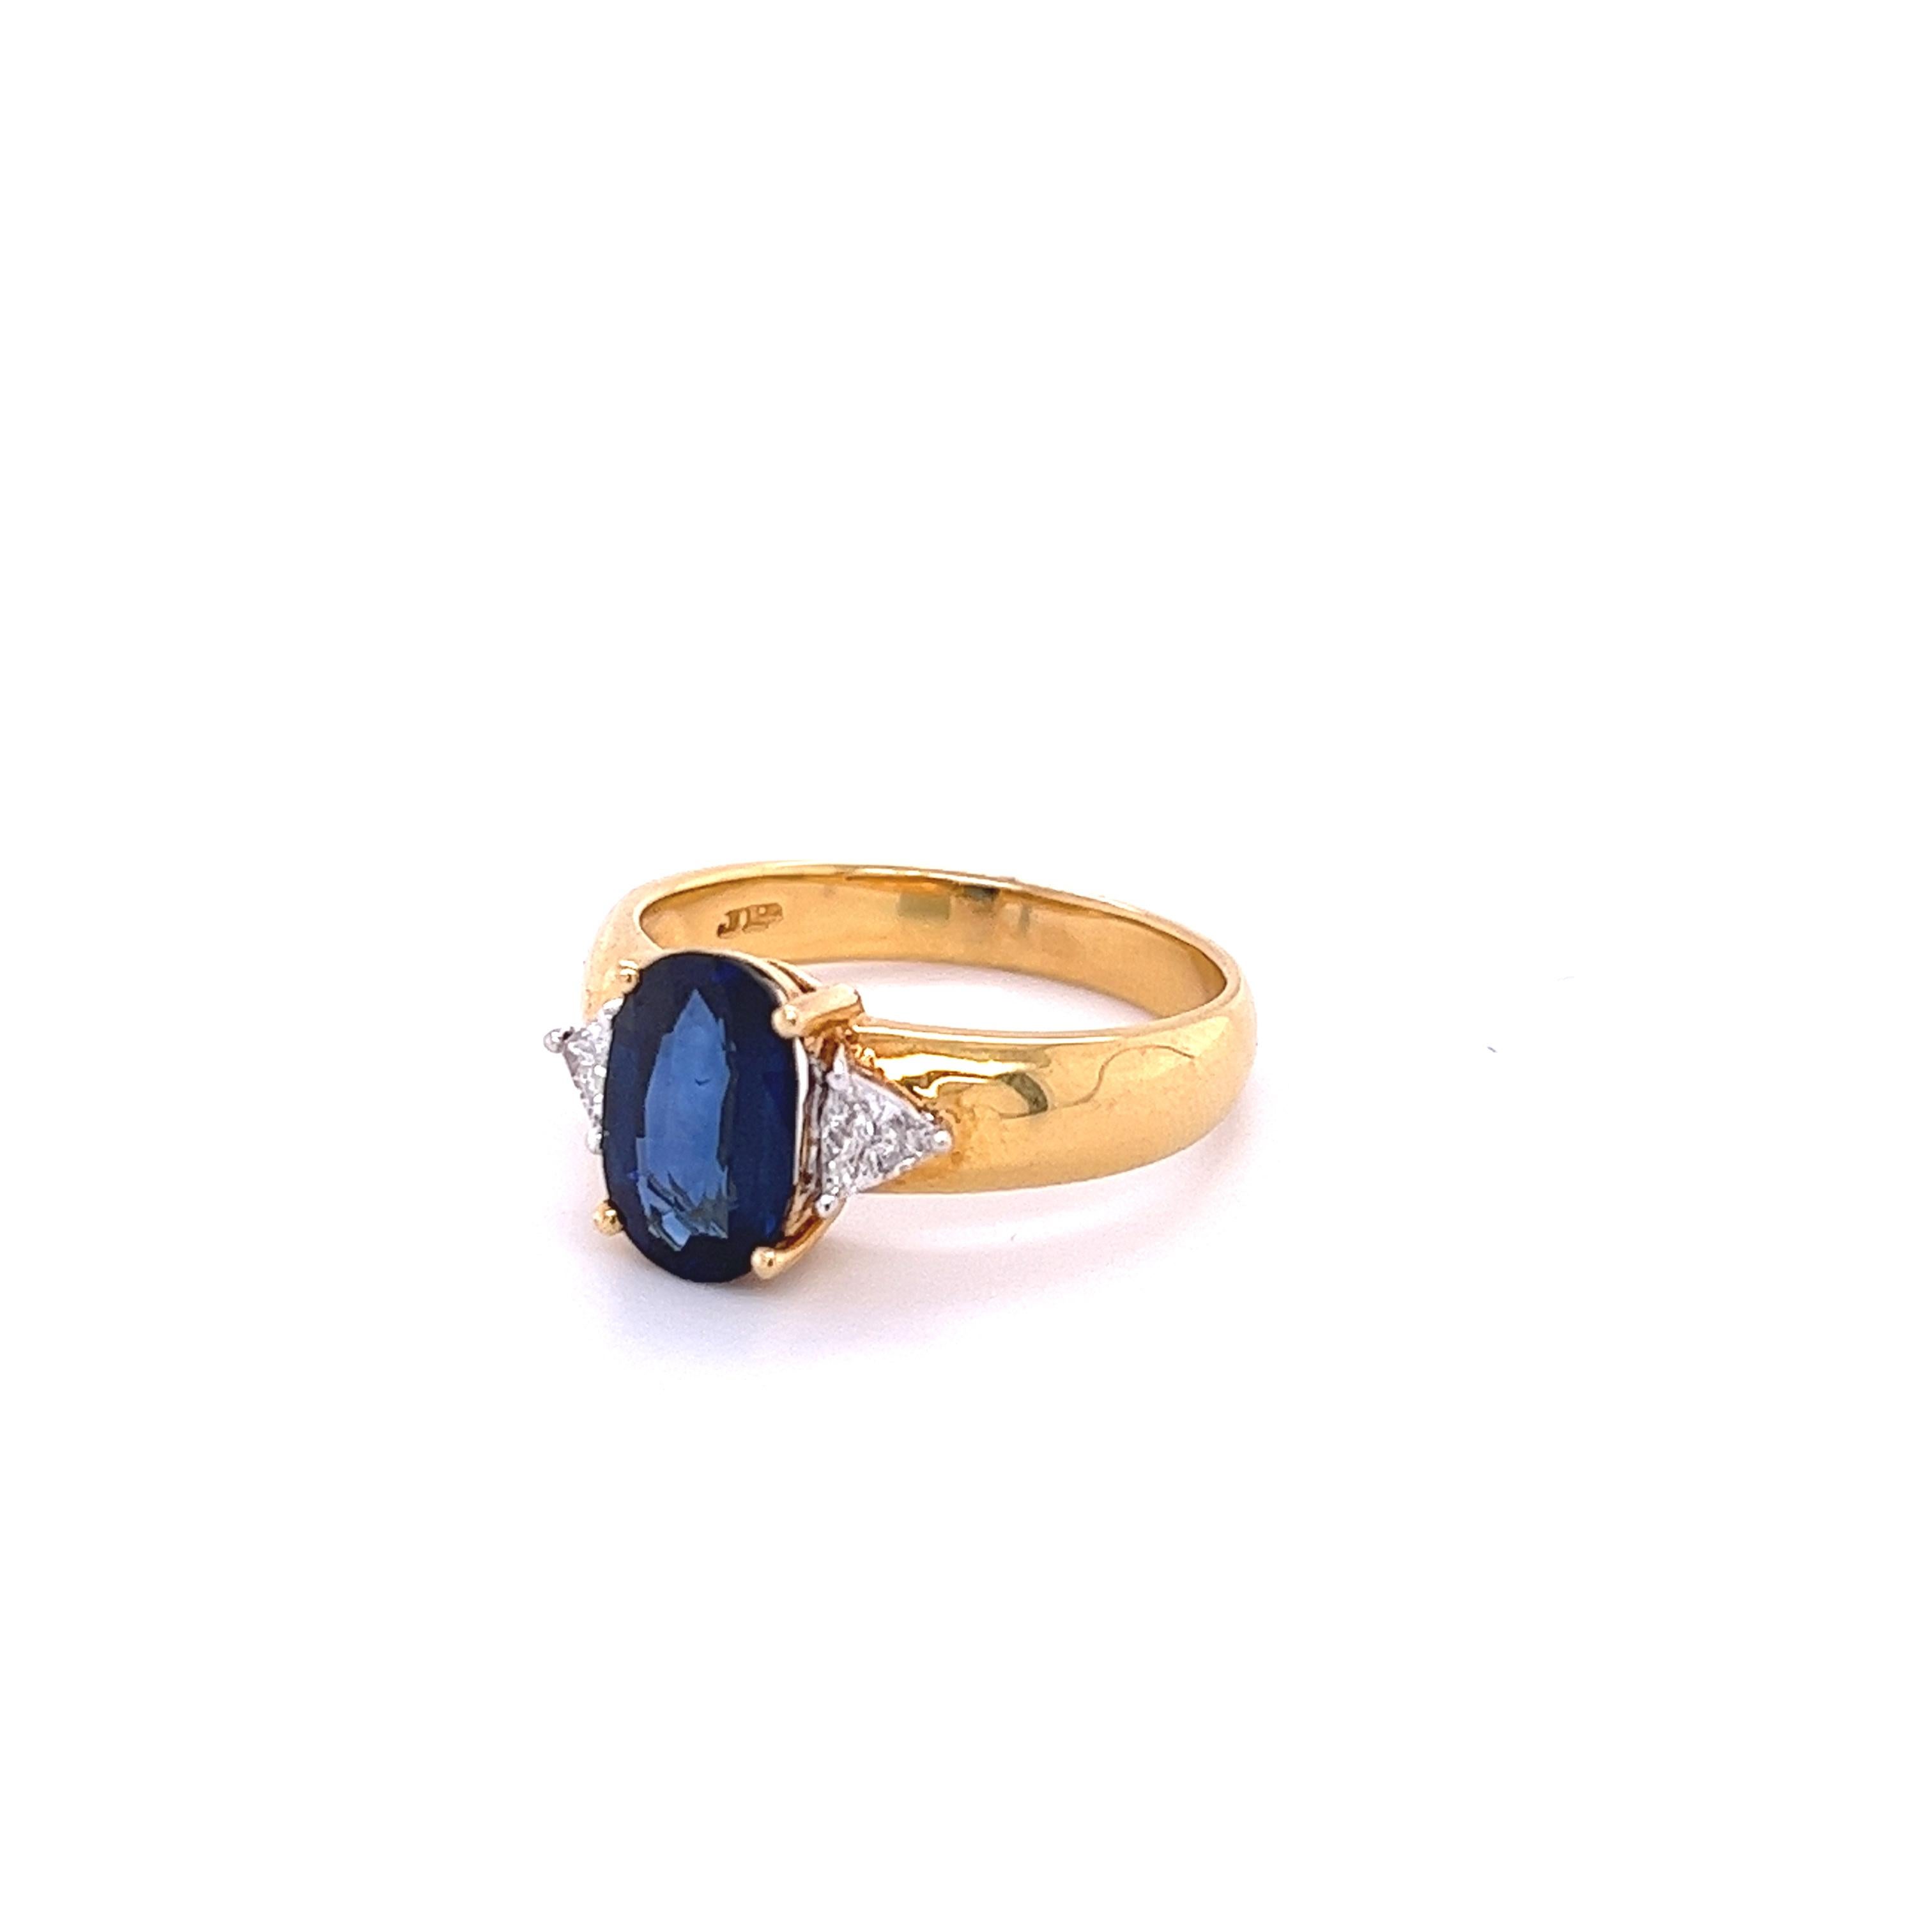 2.32-carat oval cut Blue Sapphire set with 2 trillion cut diamond accents in a 18k yellow gold ring. A simple and elegant ring setting allows for a stunning deep blue sapphire to do all the talking. 

Double Rhodium plated for a long-lasting shine.